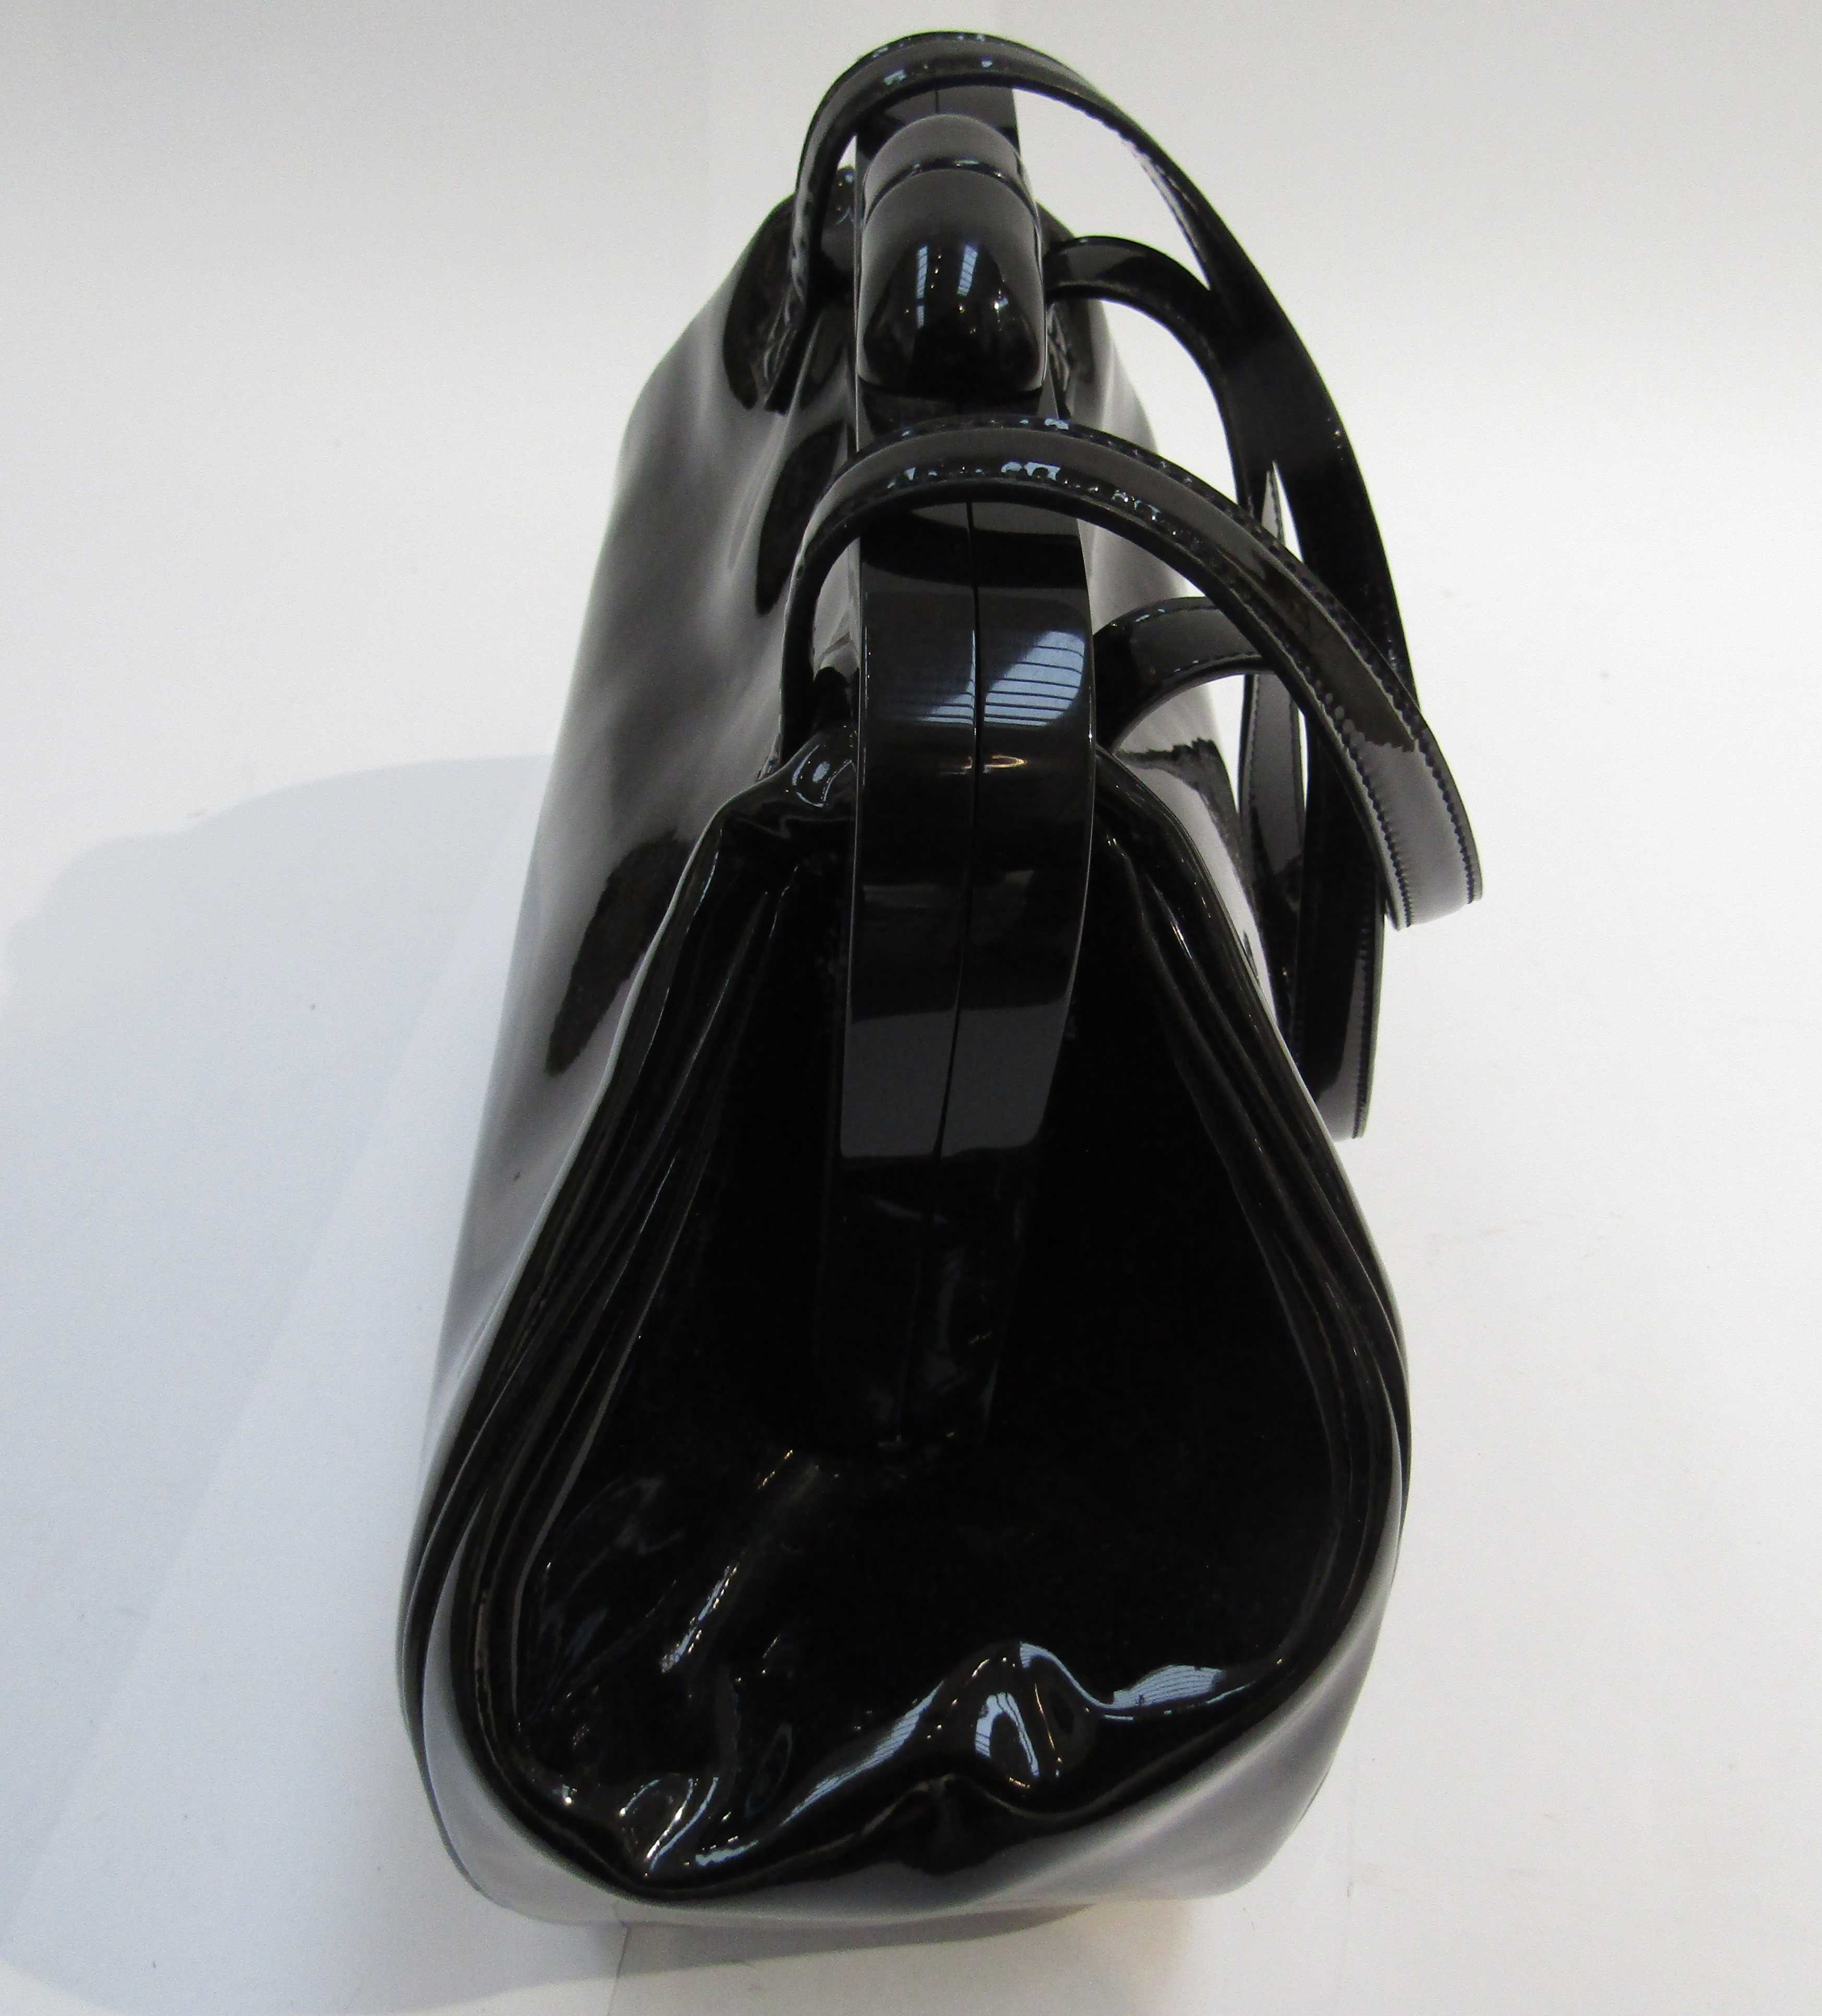 LULU GUINNESS large Pollyanna bag. This fabulous black bag has a patent leather body. - Image 13 of 14